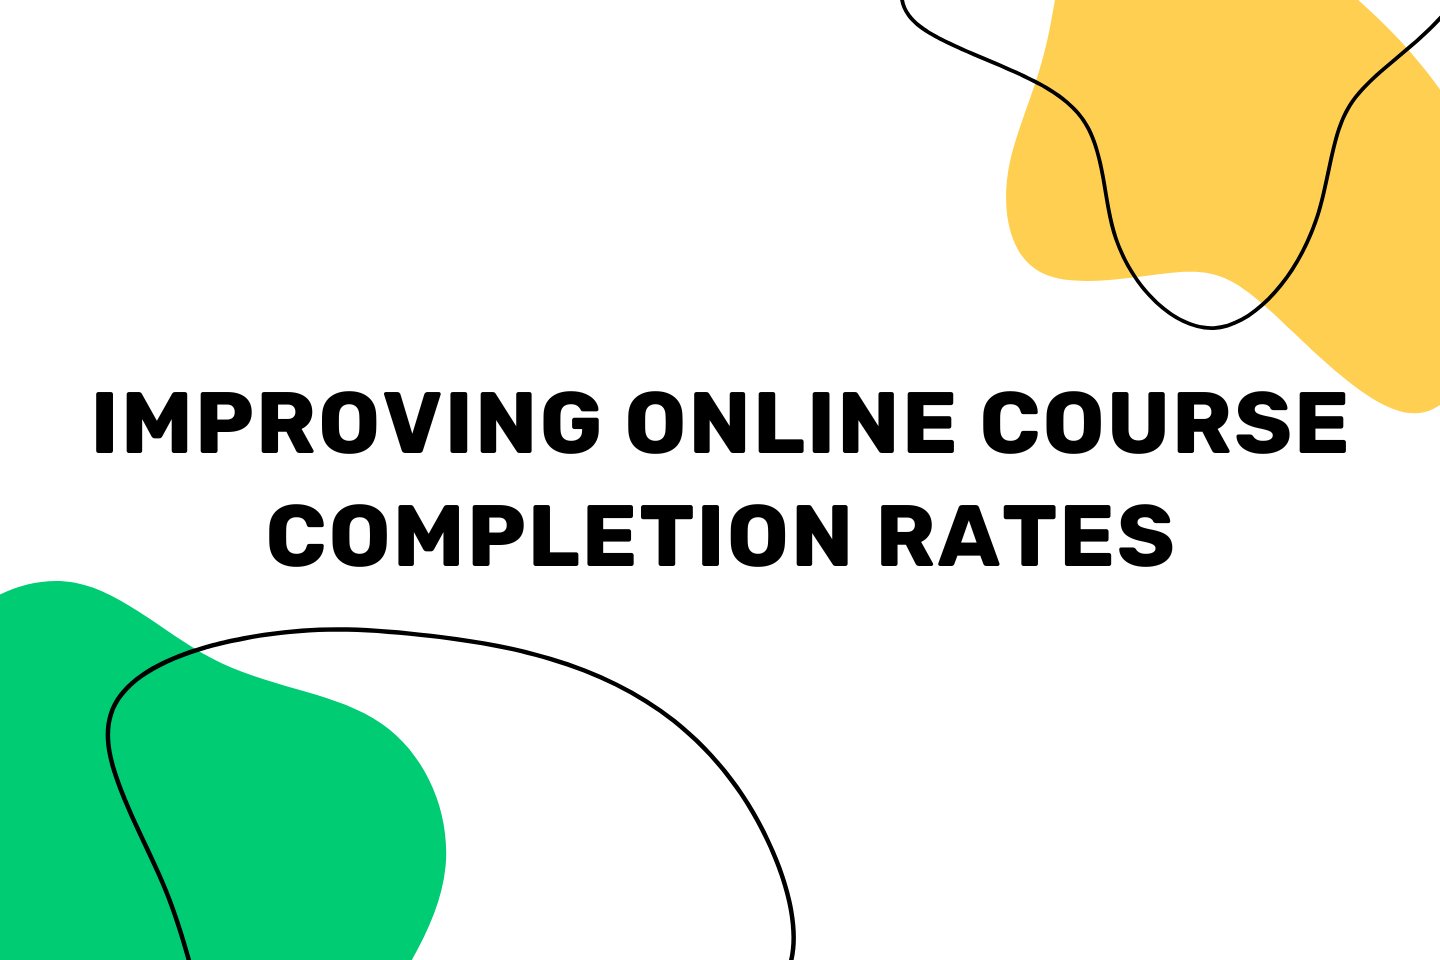 Improving Online Course Completion Rates